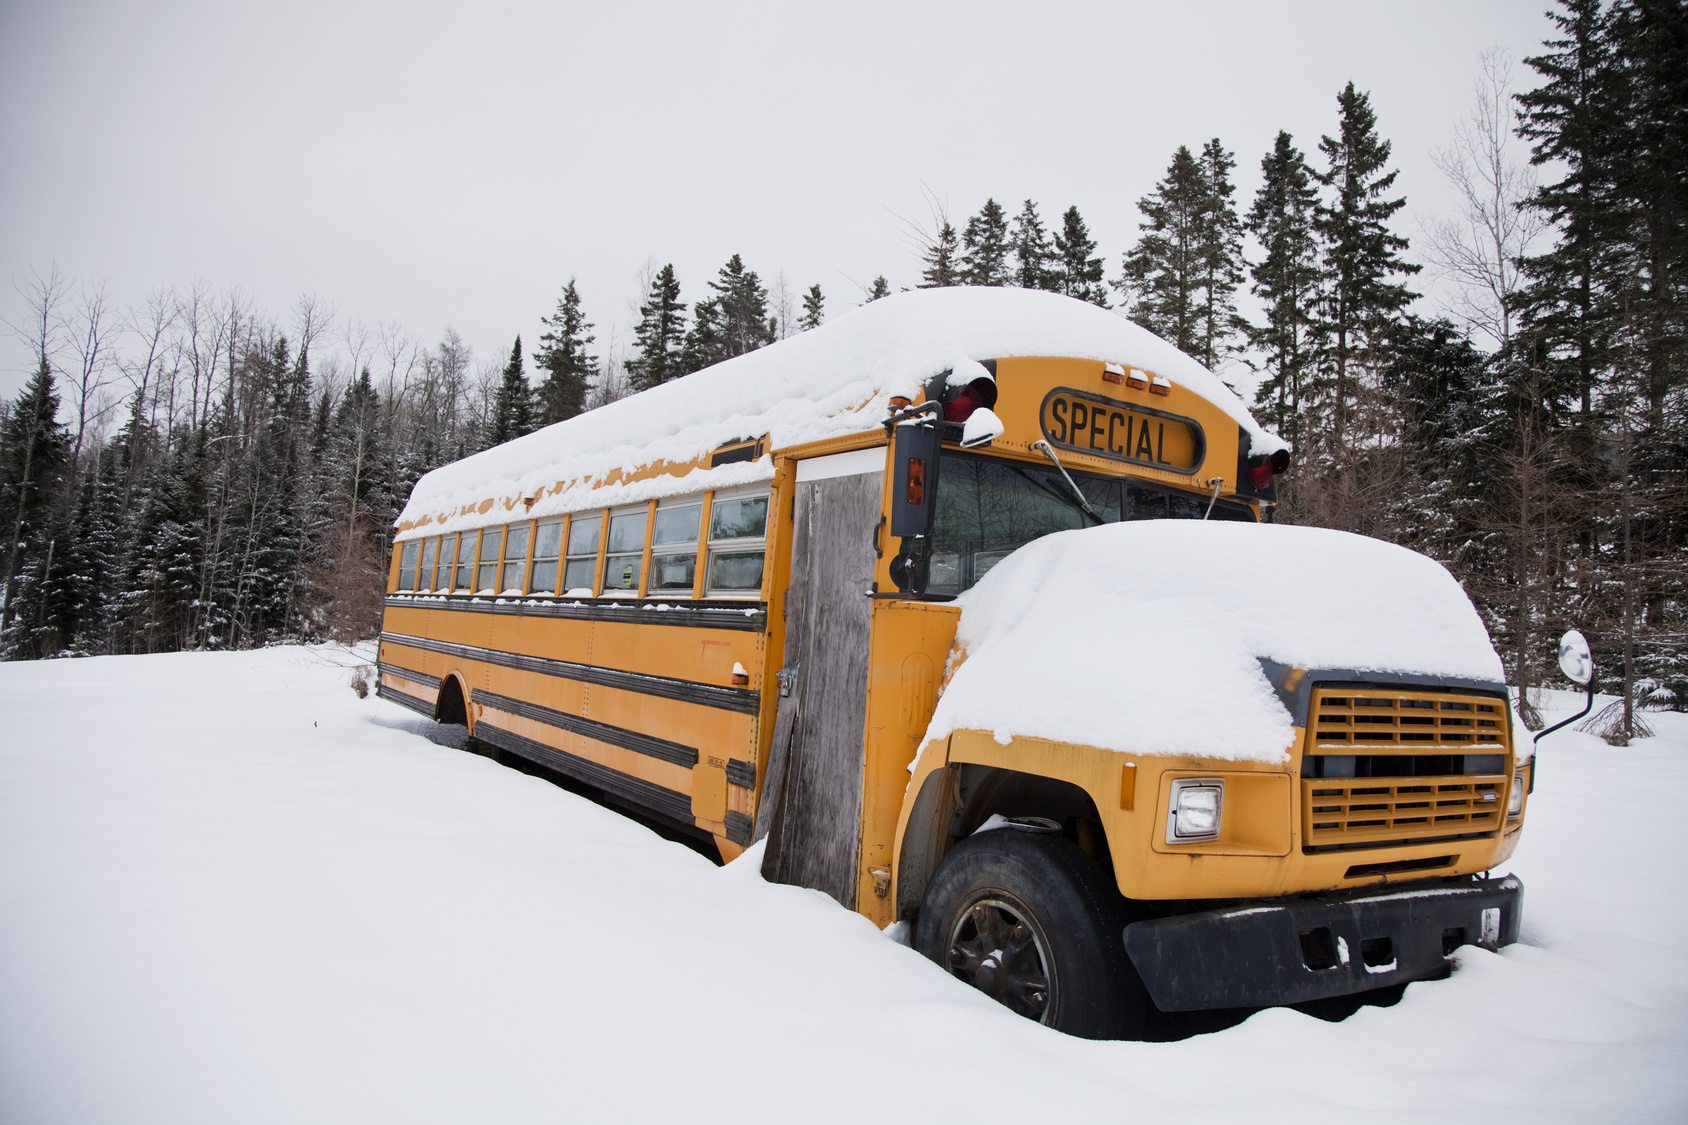 Wednesday February 13th Bus Cancellations